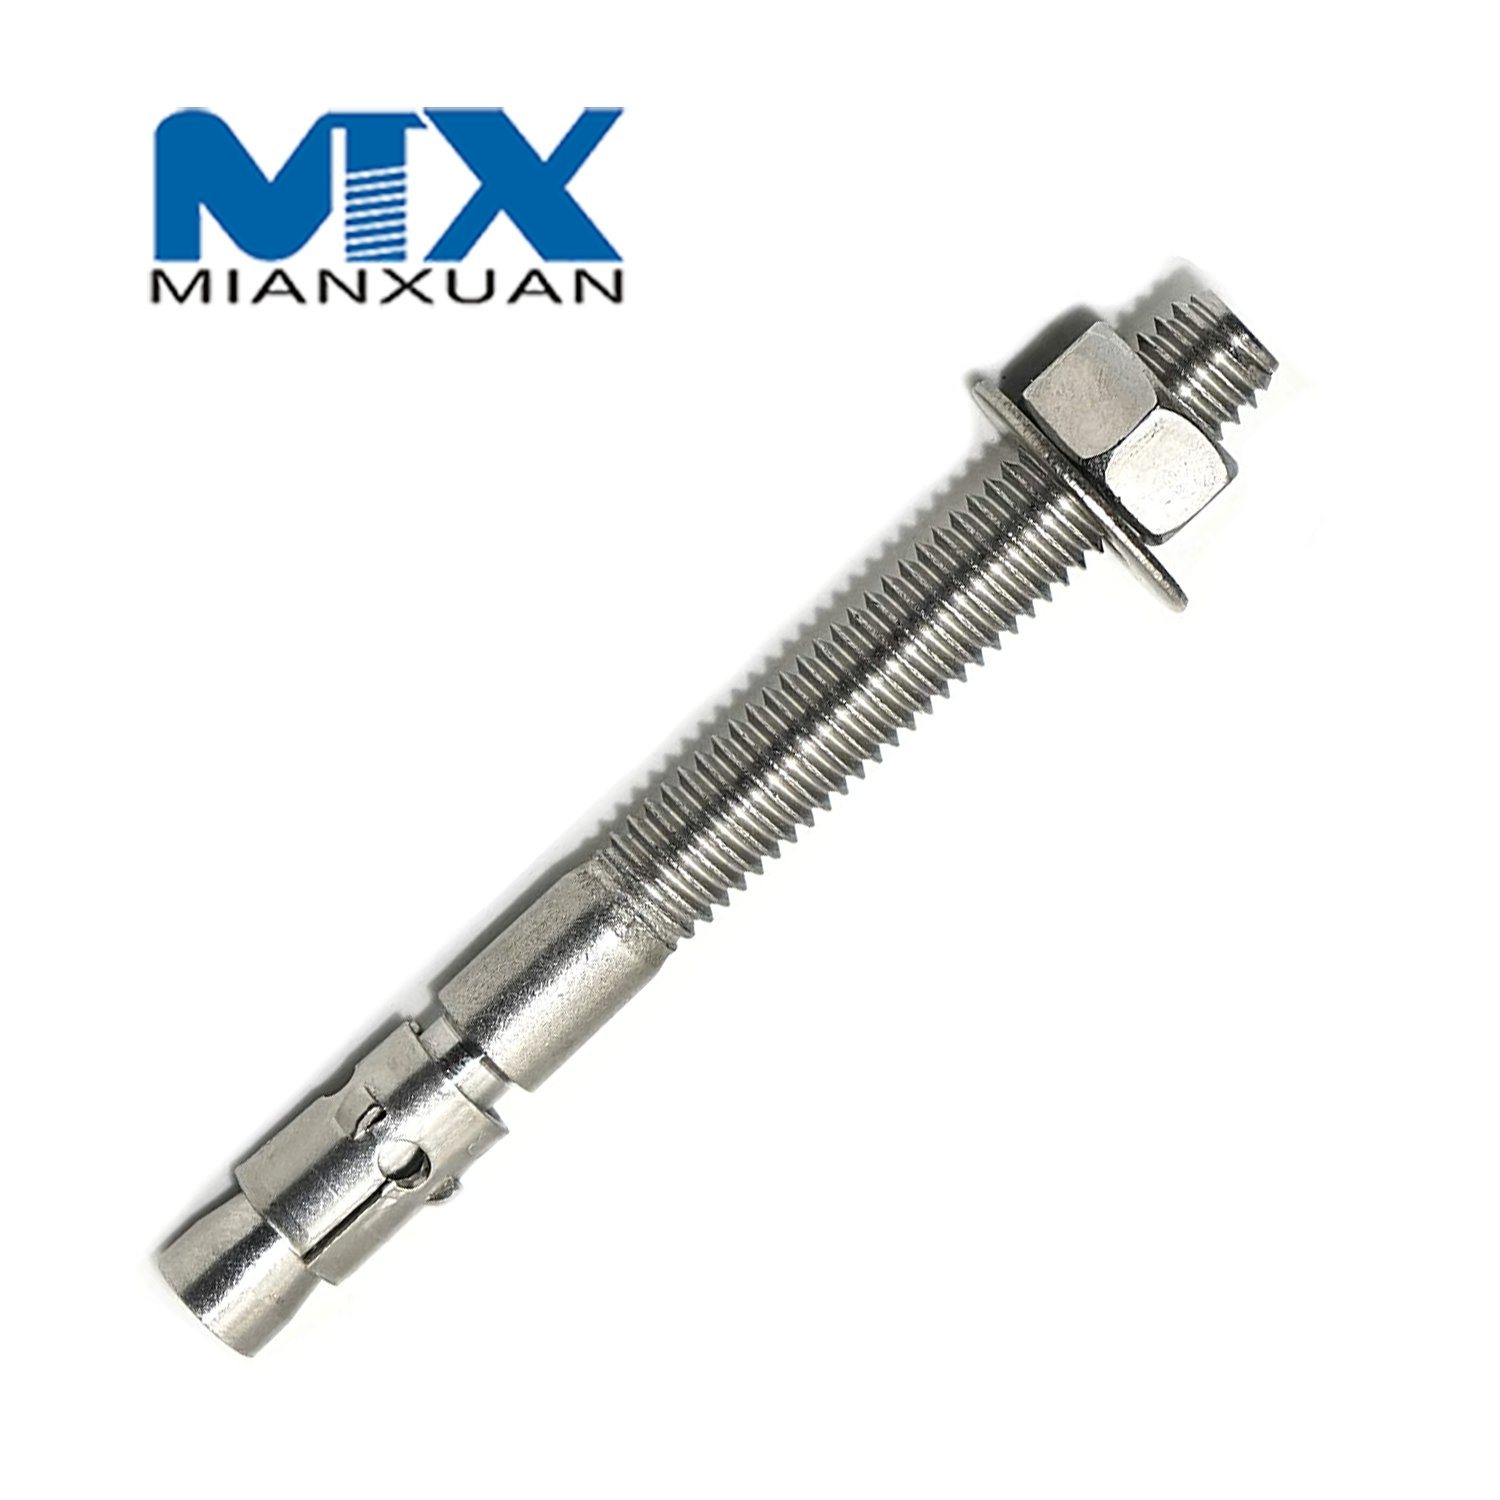 Stainless Steel Carriage Bolt for Mechanical Expansion Hollow Wall Lifting Anchor Fastener